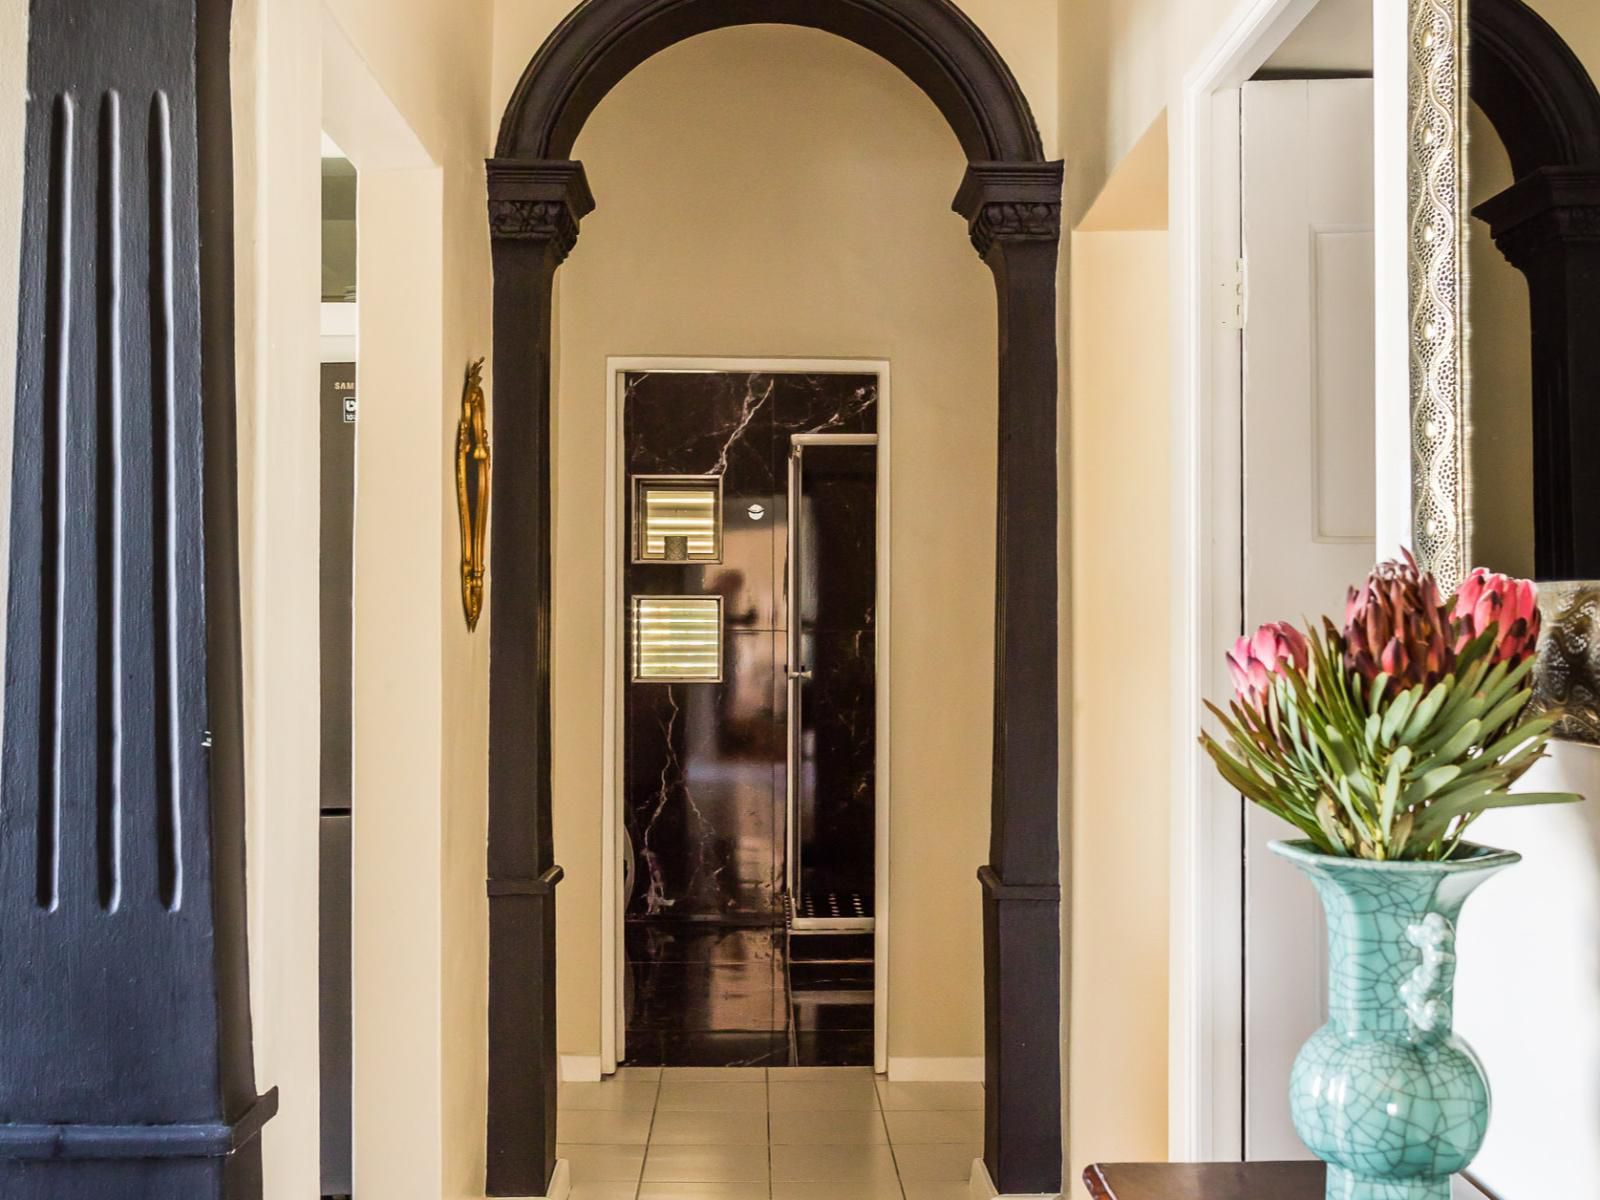 Vesper Apartments Green Point Cape Town Western Cape South Africa Door, Architecture